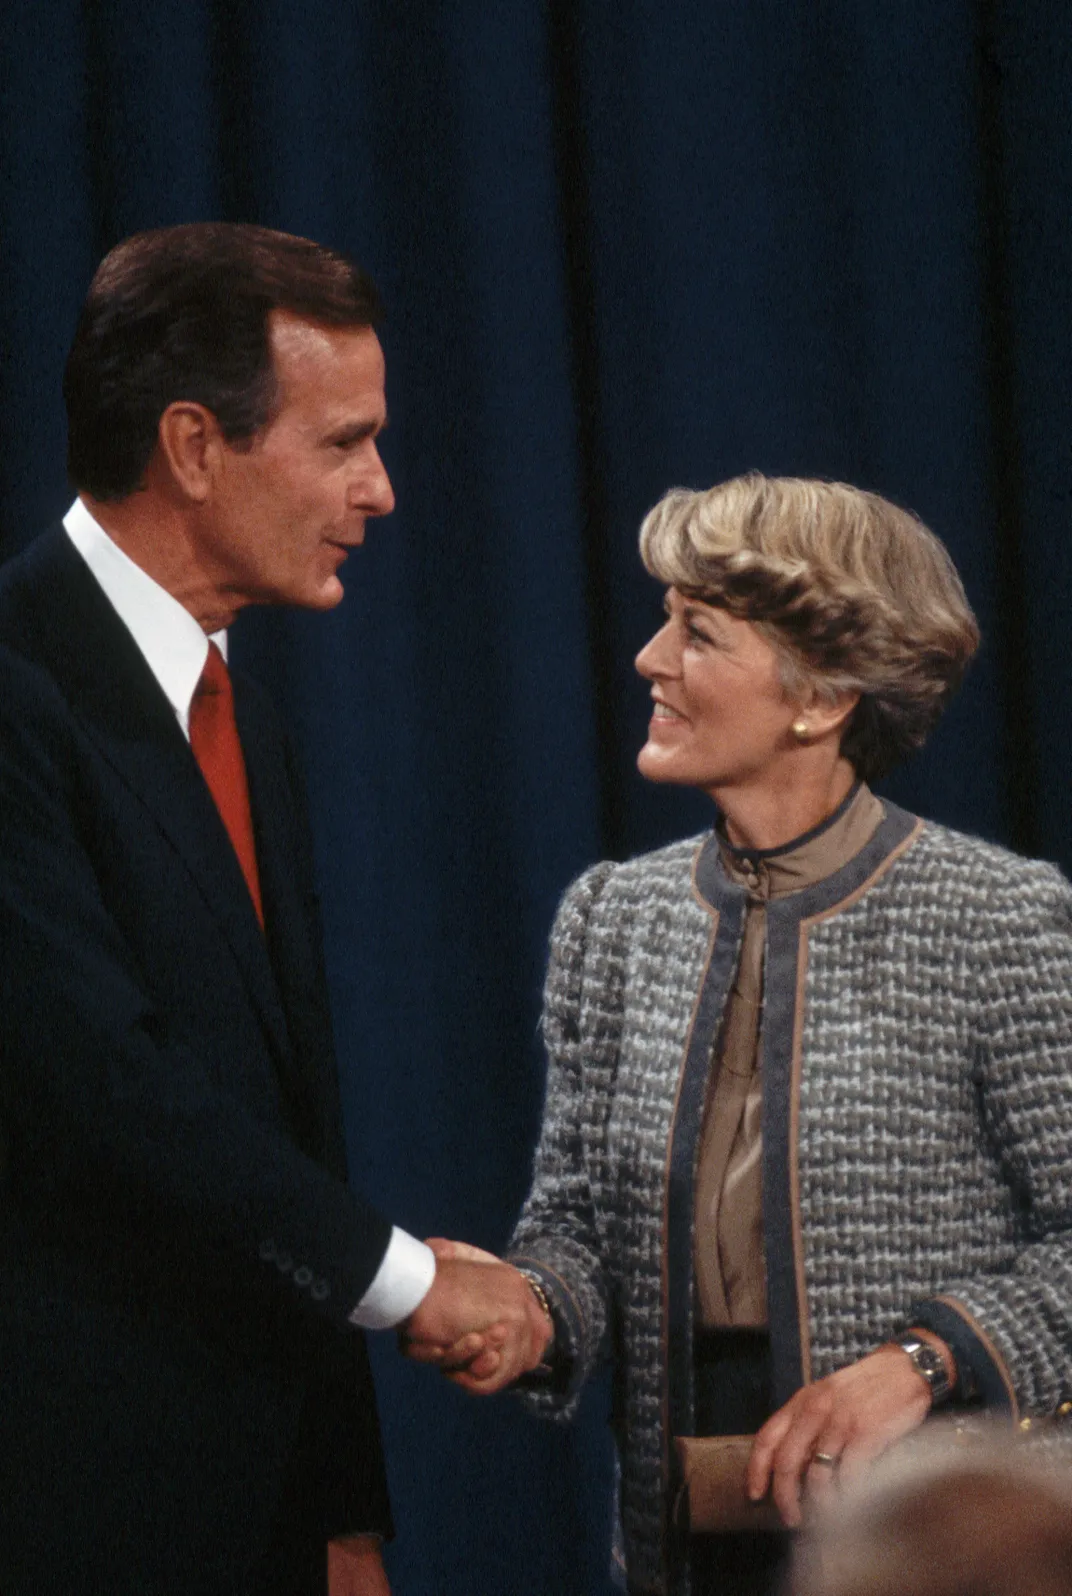 Bush and Ferraro shake hands at the beginning of the debate' a pin saying 'I survived the Ferraro-Bush Great Philly Debate'